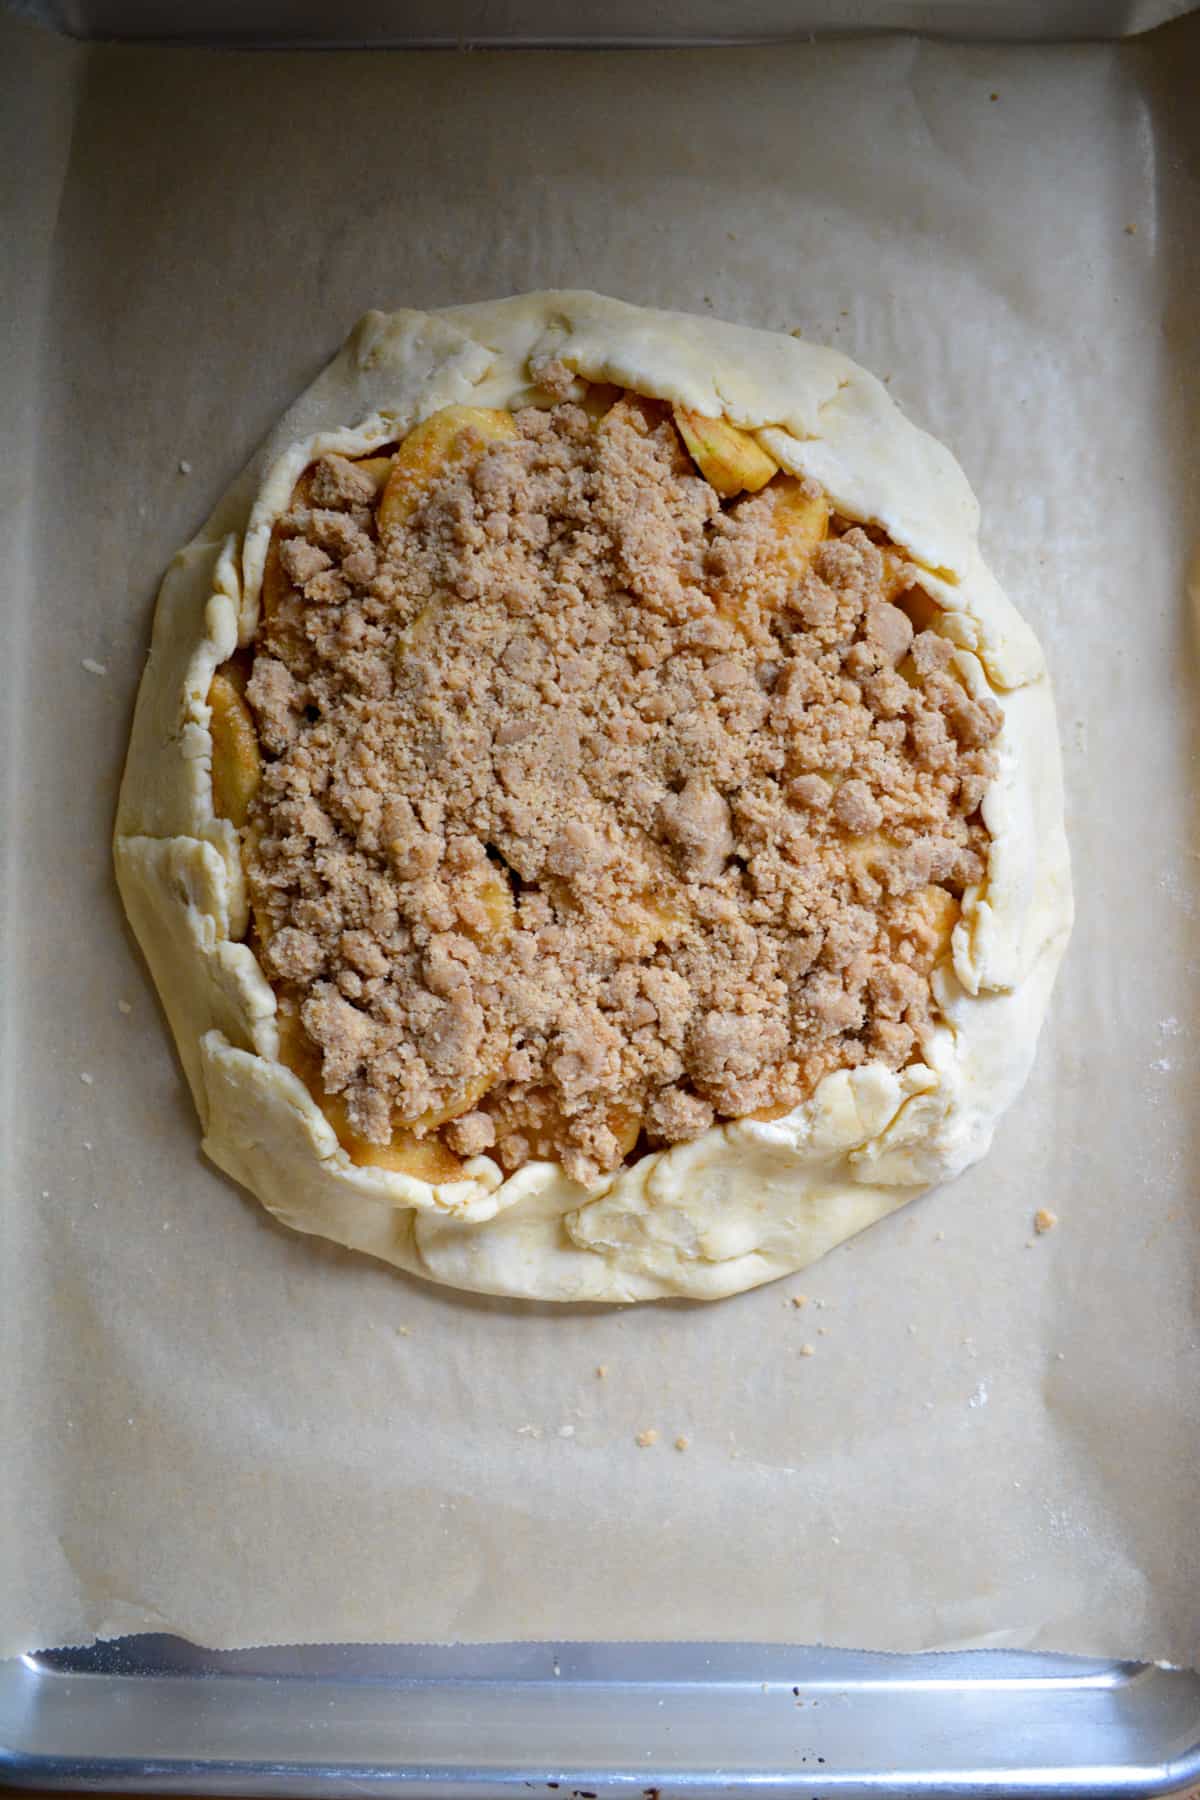 Galette topped with streusel and ready to bake.